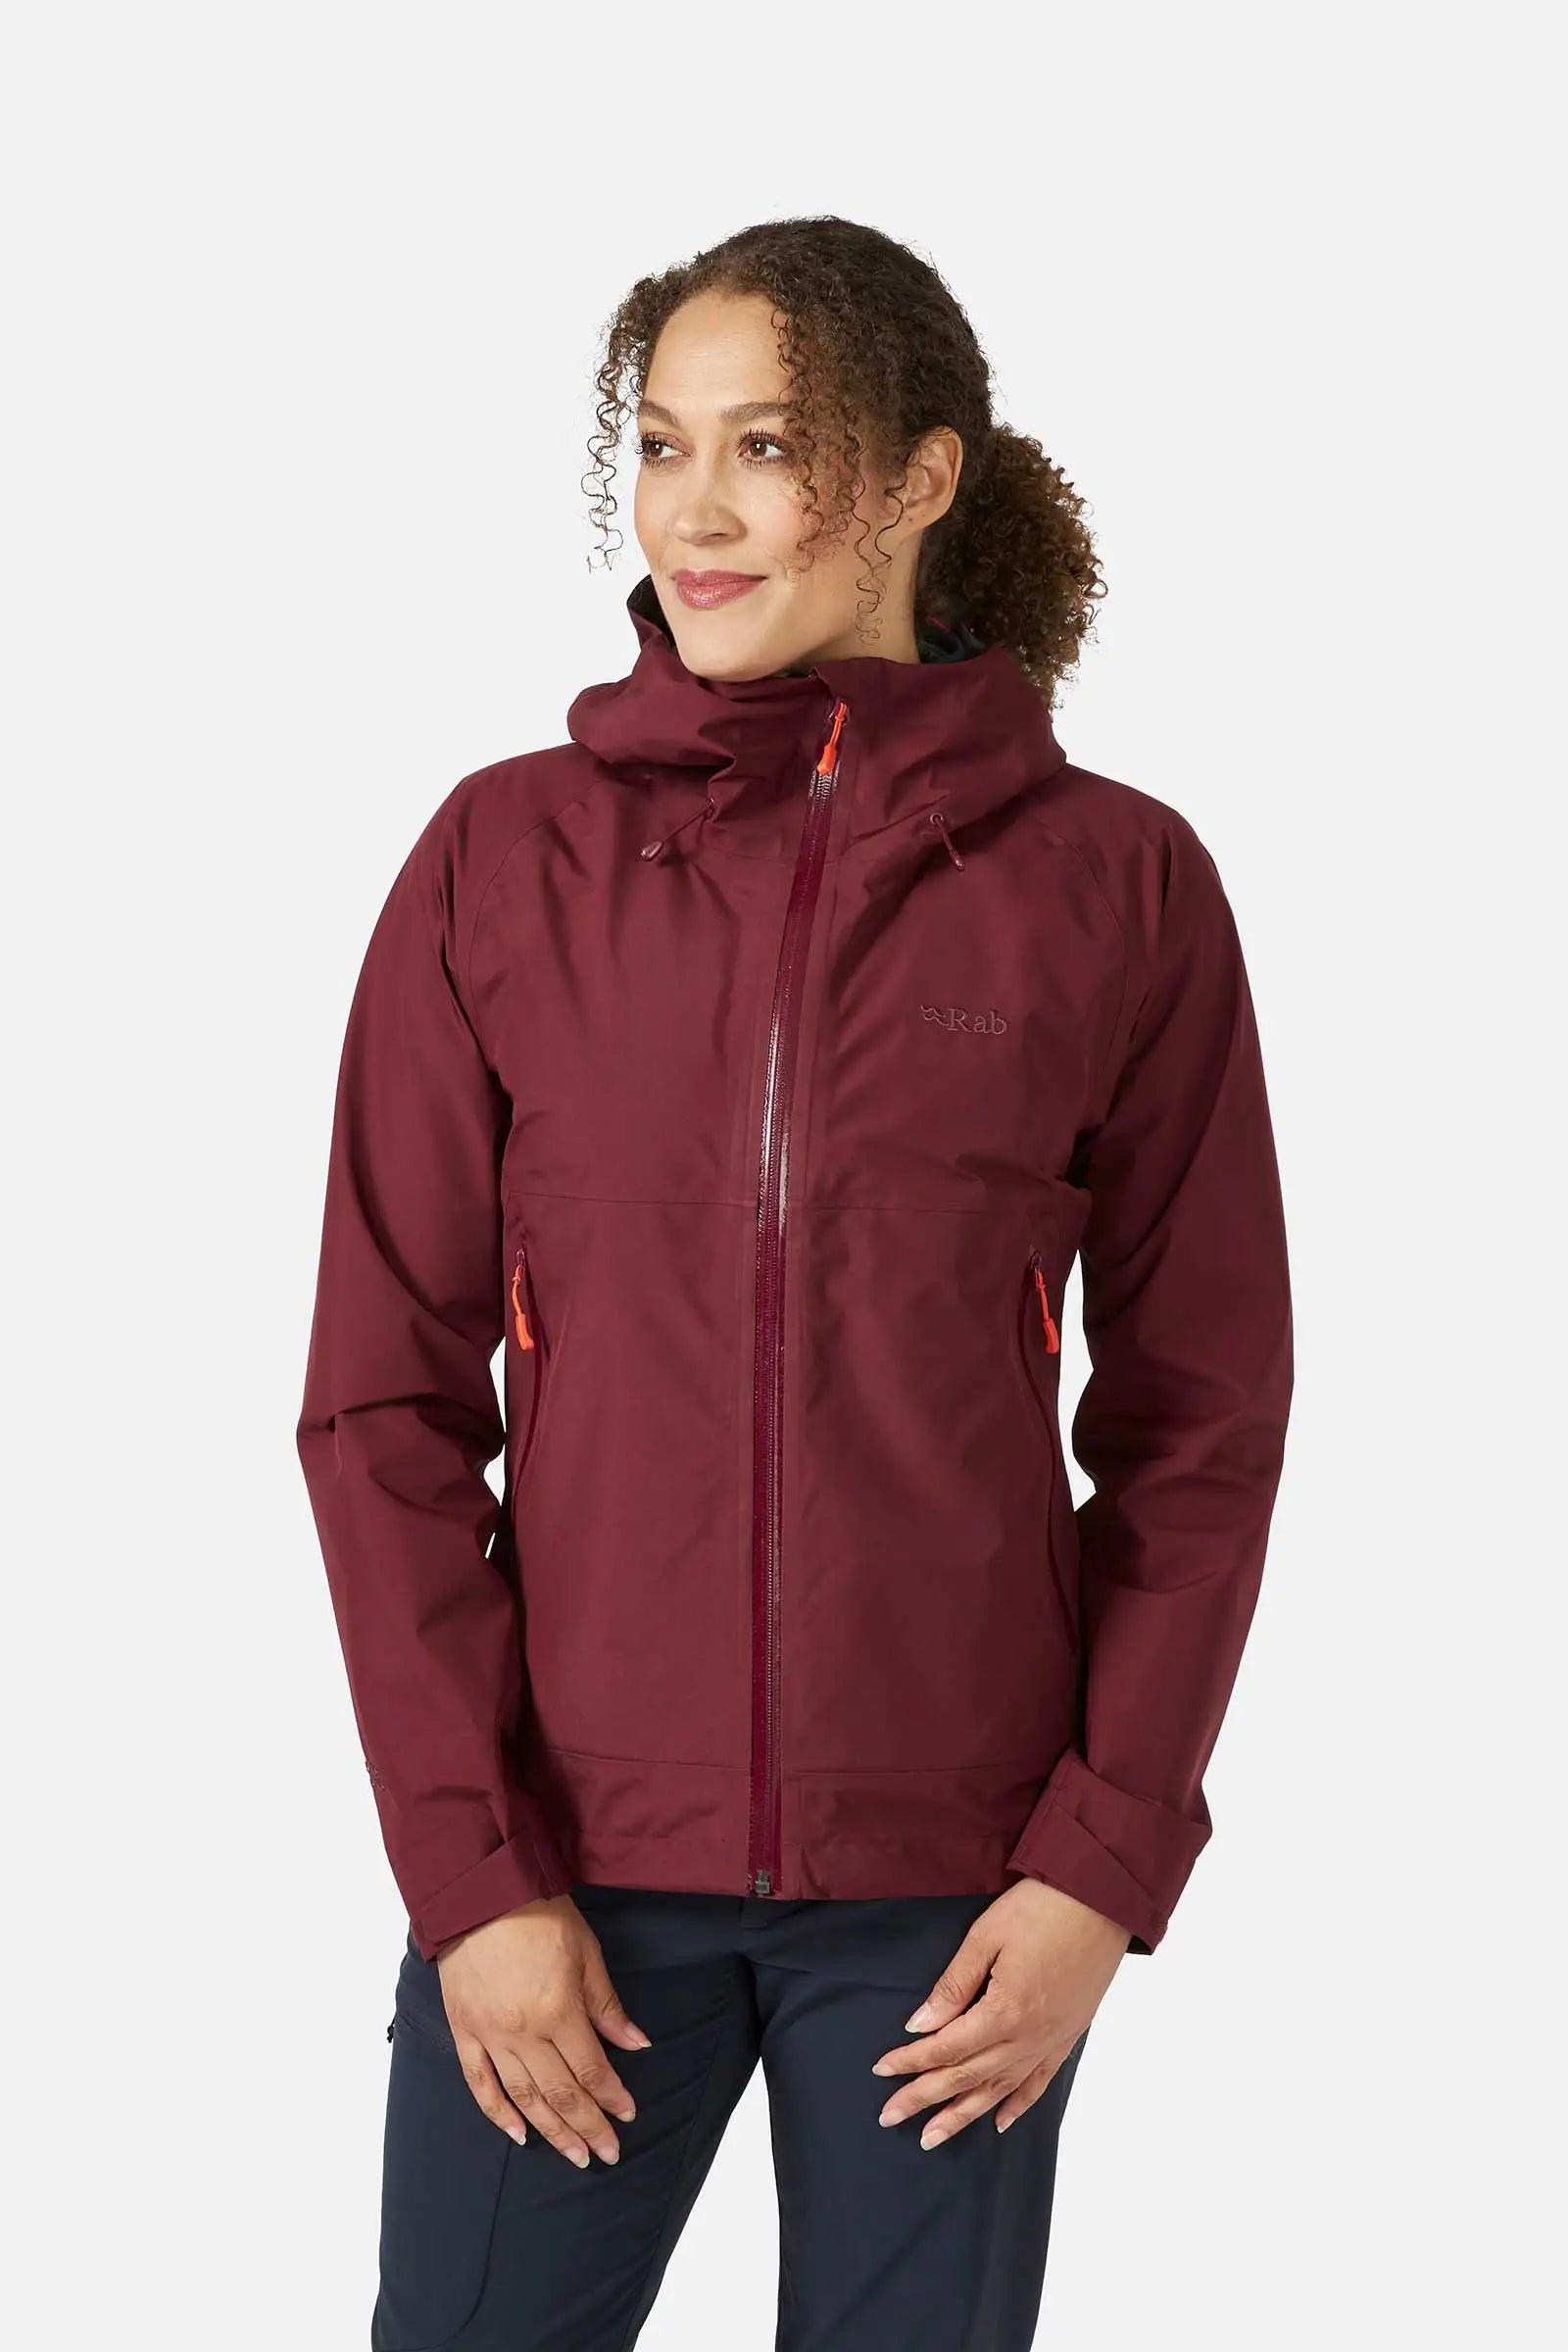 Rab Women's Namche Gore-TEX Jacket - Outfitters Store